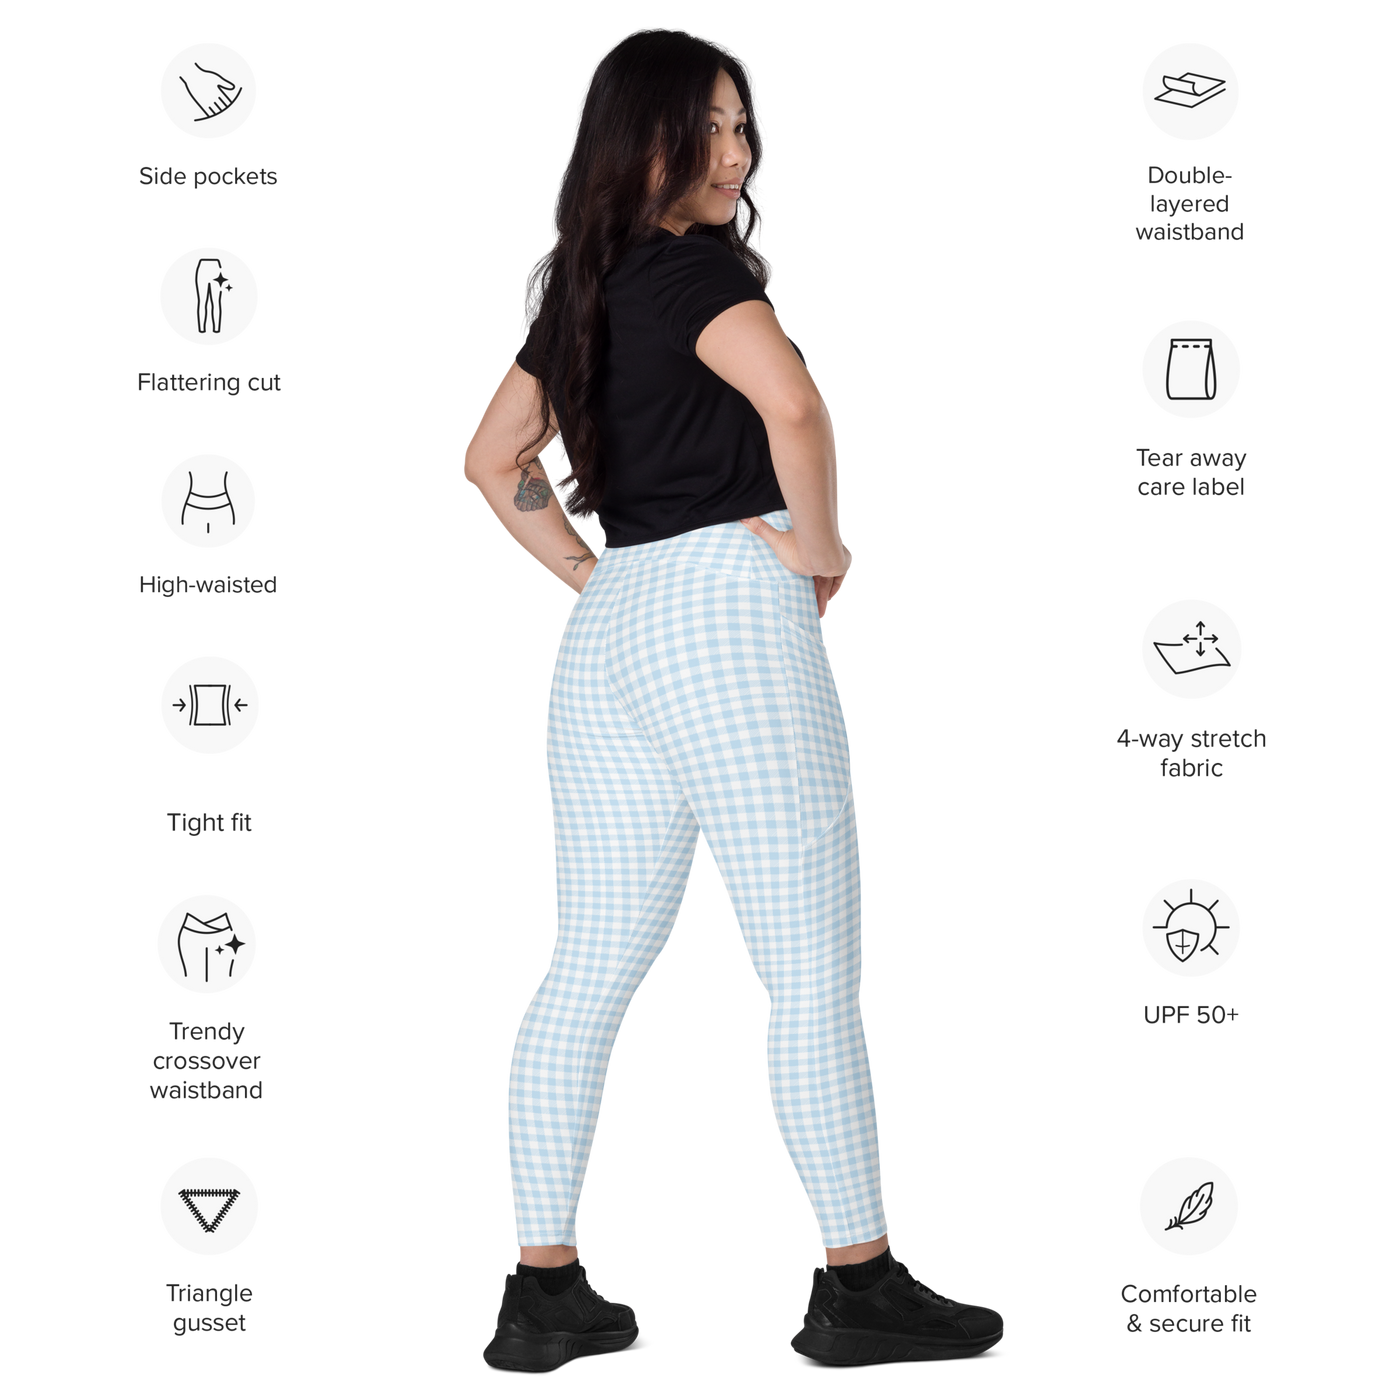 'Blue Gingham' Crossover Leggings with pockets